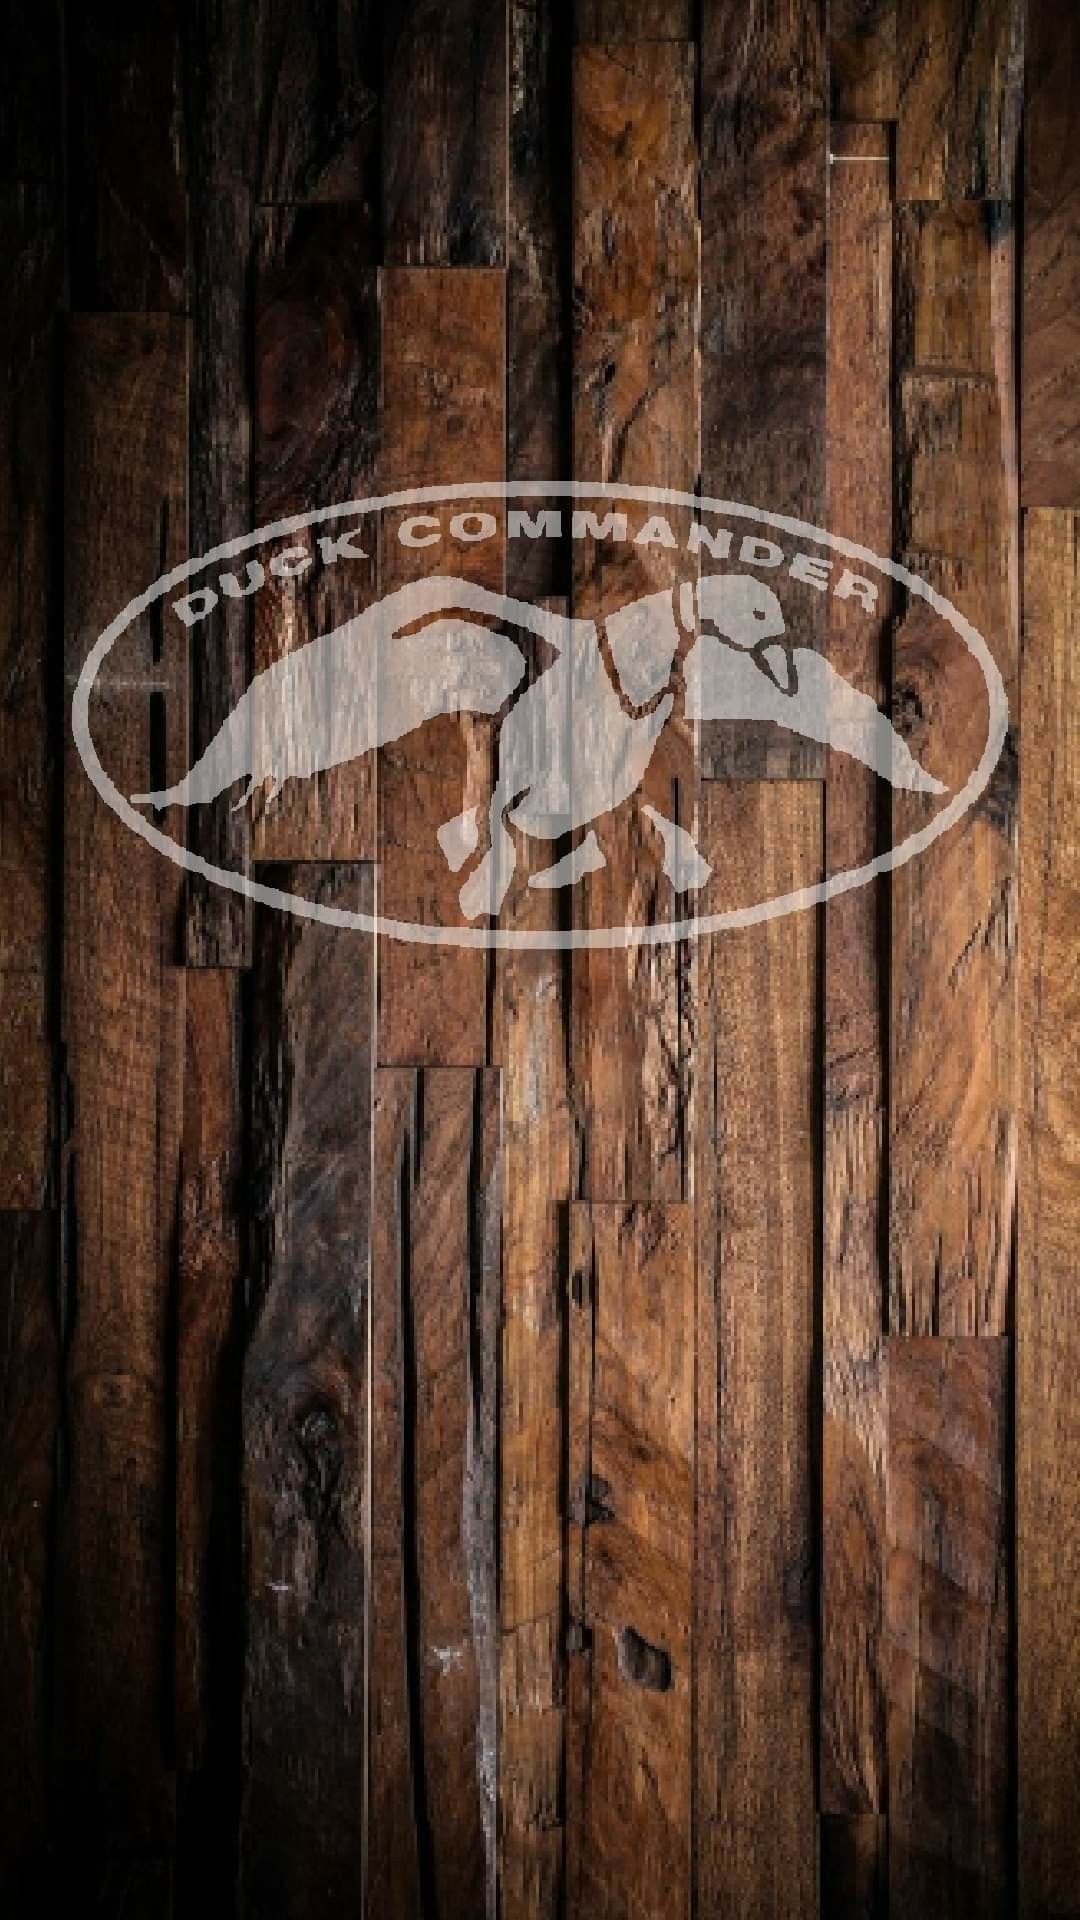 Duck Dynasty Wallpapers